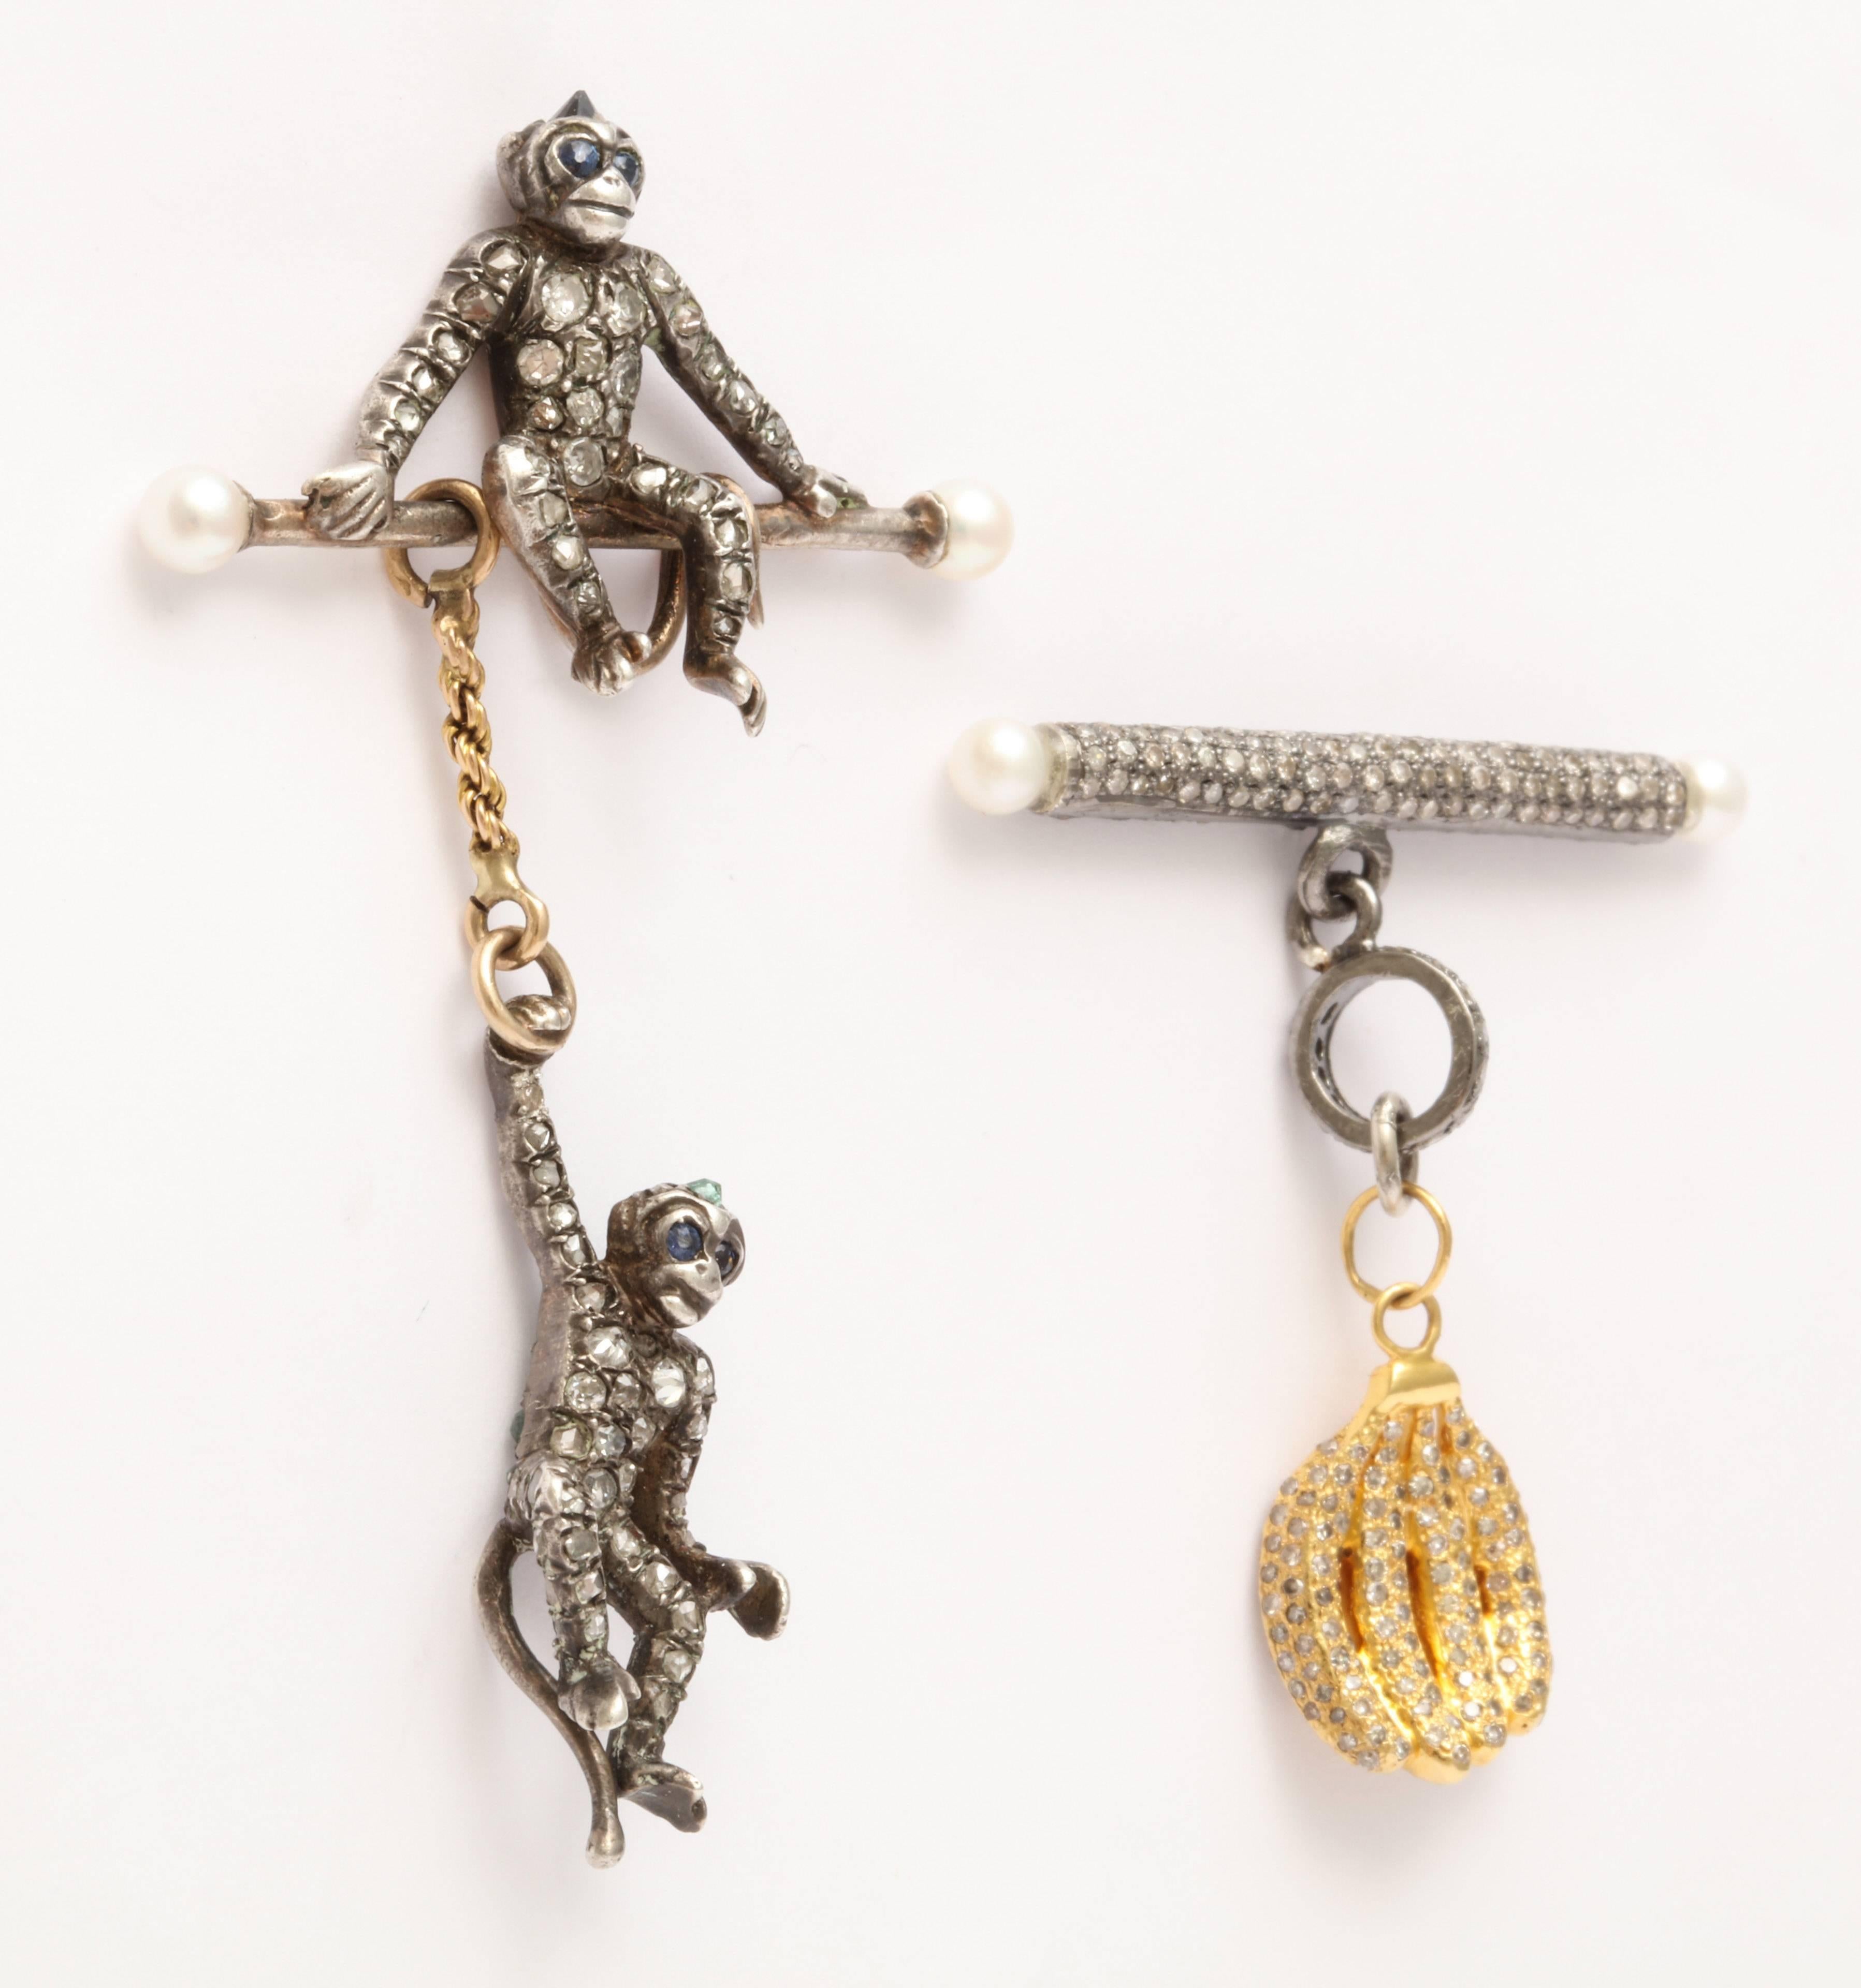 A pair of earrings composed of swinging monkeys and a bunch of bananas.
The 18kt yellow gold bananas are set with diamonds and hang from a rhodium plated sterling silver and diamond branch set with pearls. The monkeys belonged to an antique french